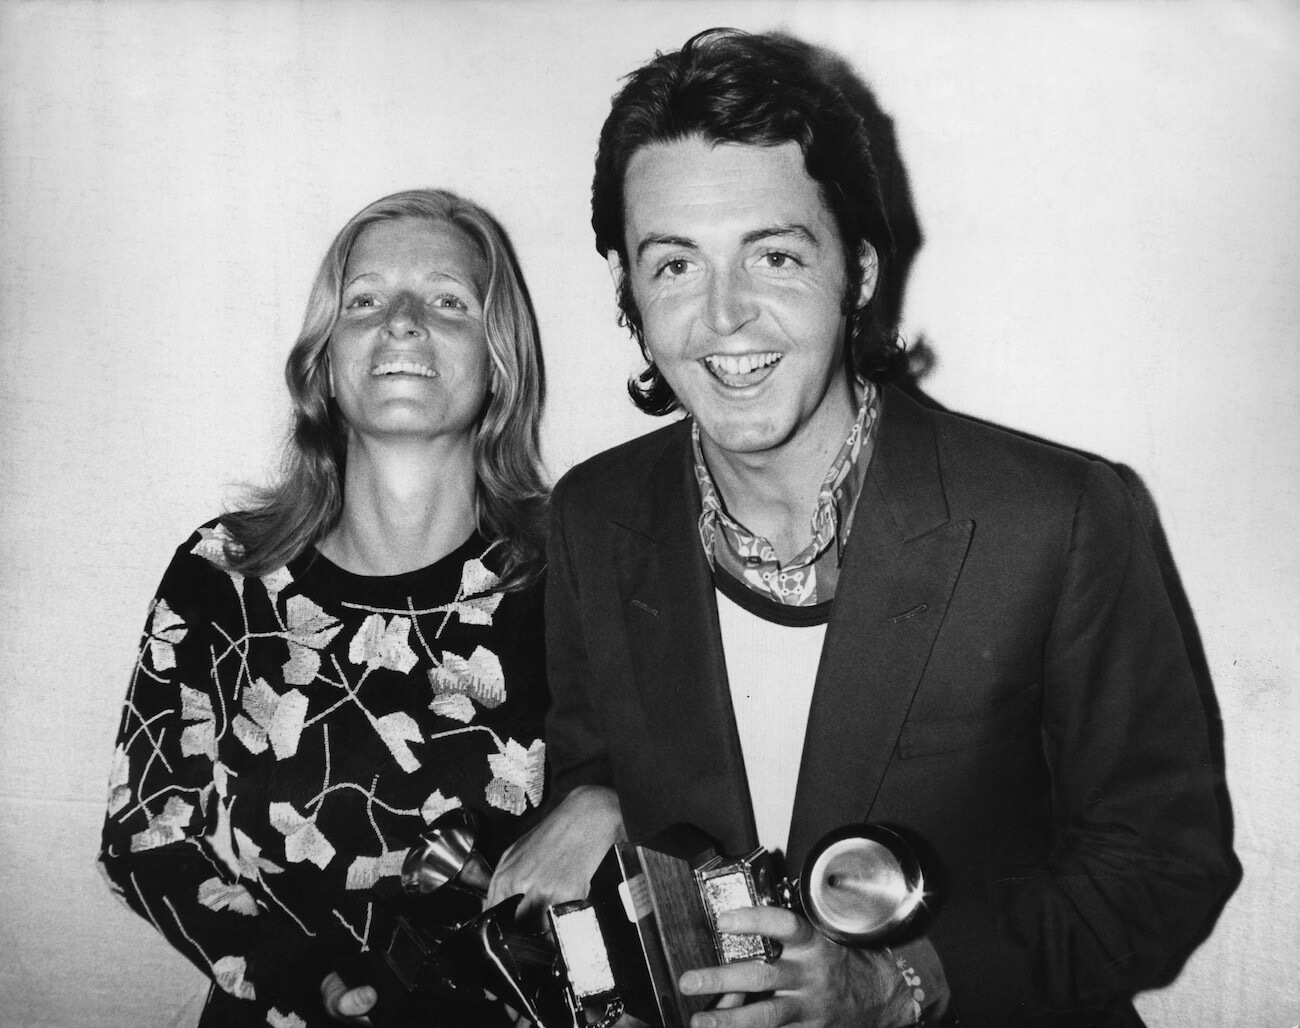 Paul McCartney with his wife Linda picking up The Beatles Grammy awards in 1971.